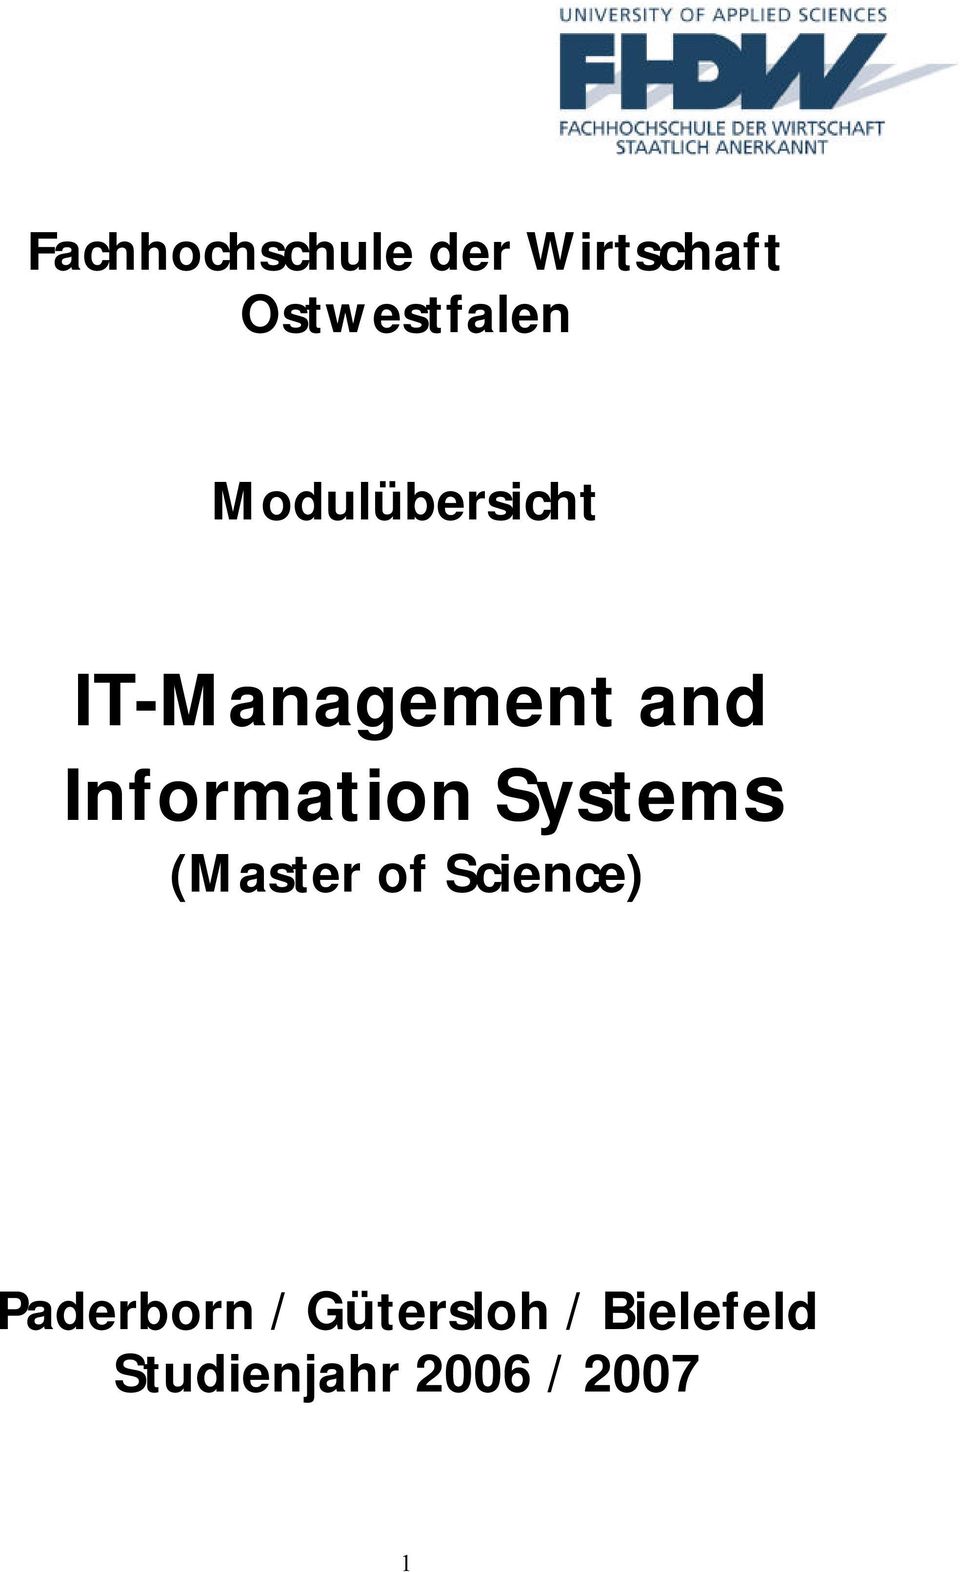 Information Systems (Master of Science)